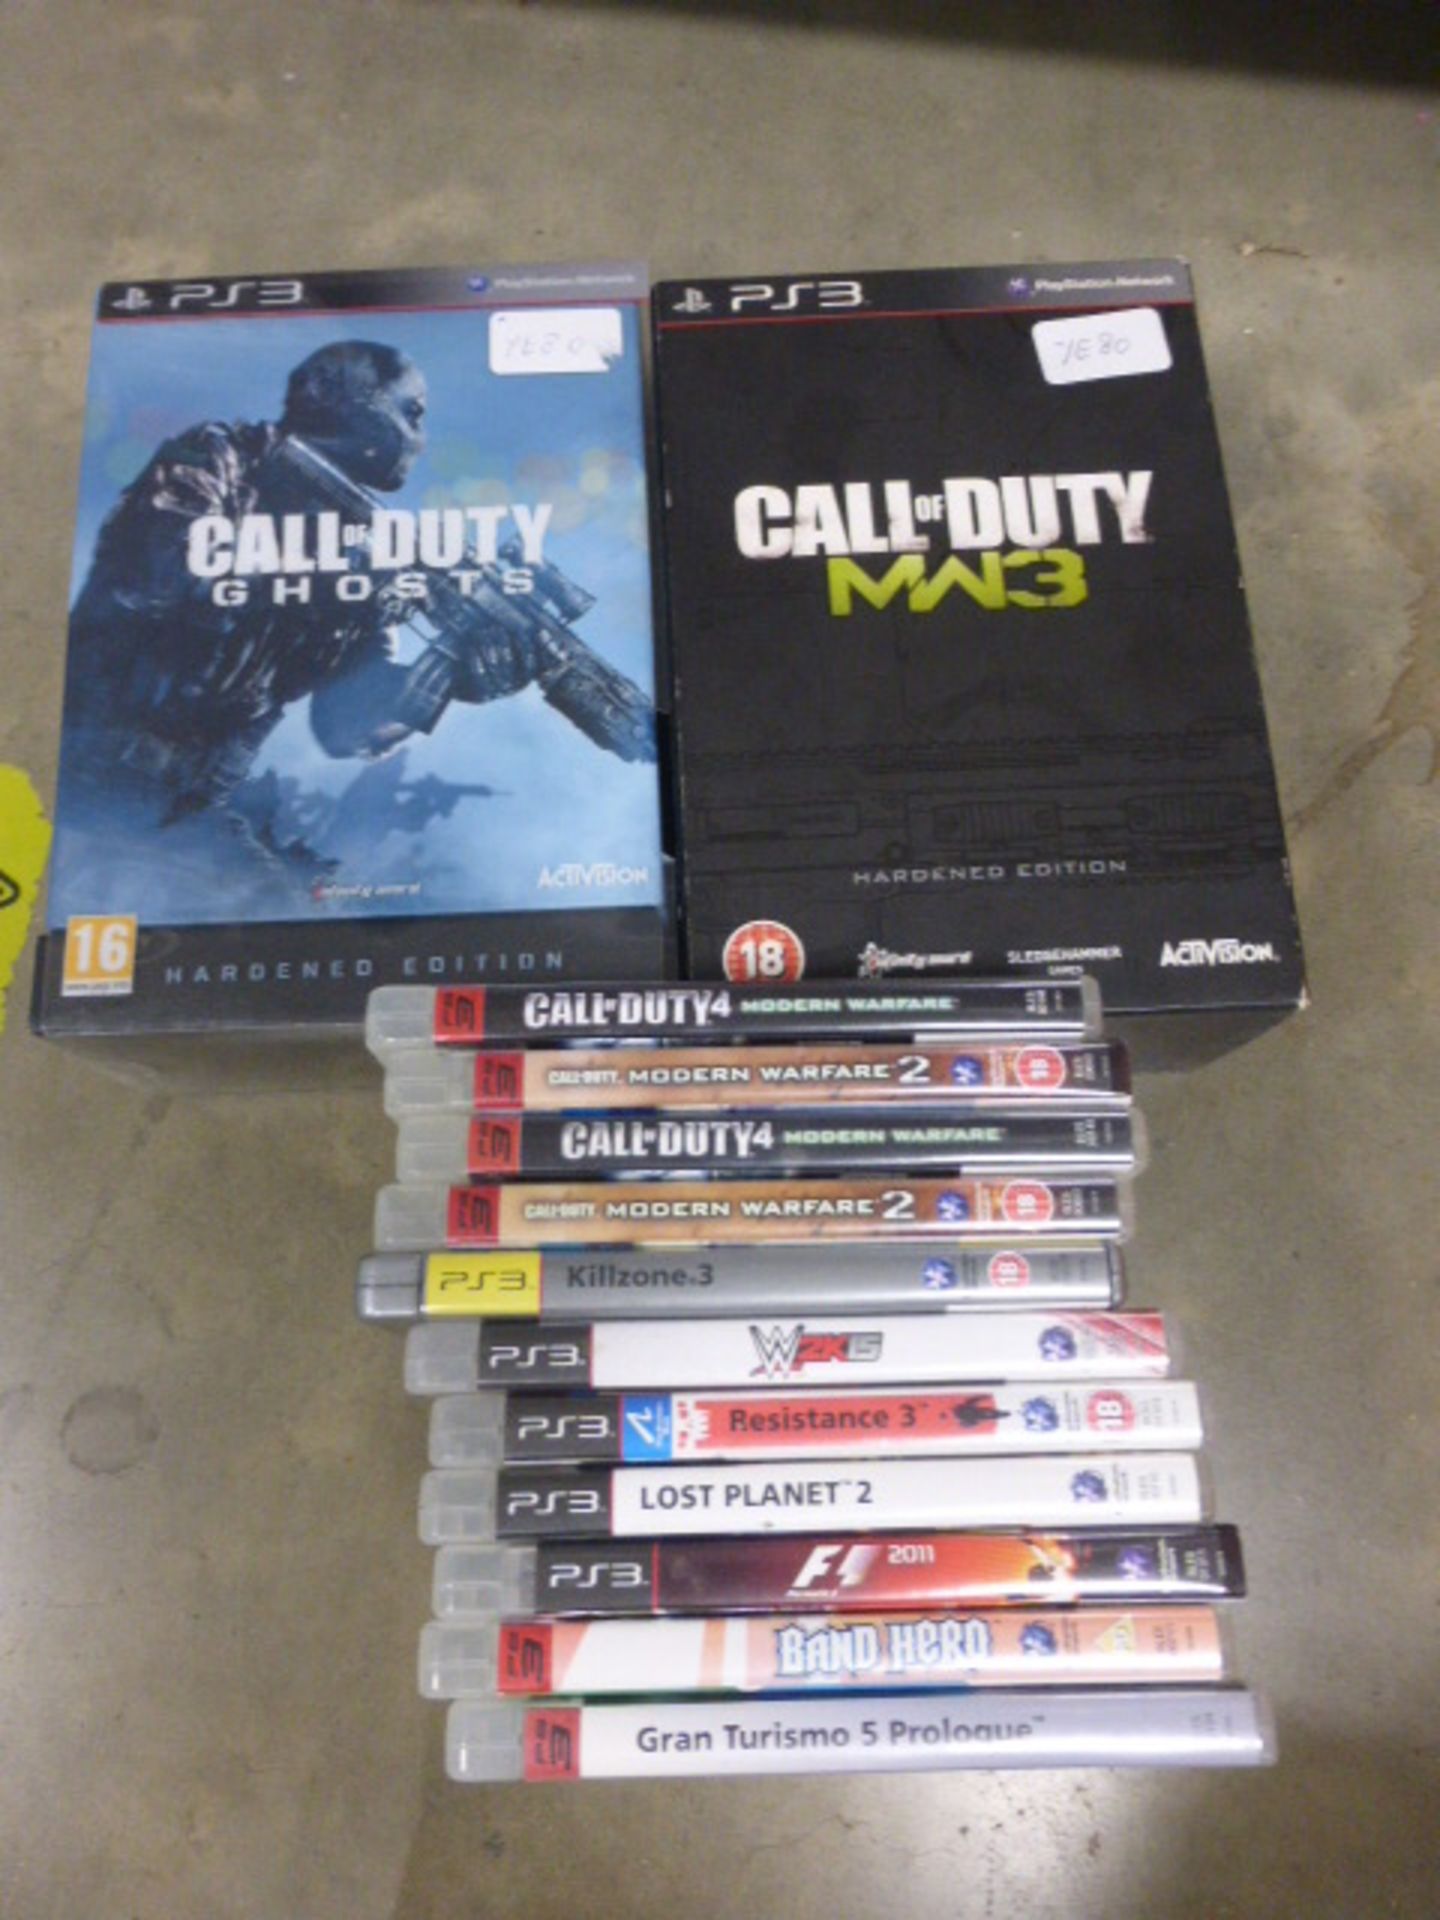 Bag containing various Playstation 3 games and 2 Call of Duty PS3 bundle packs